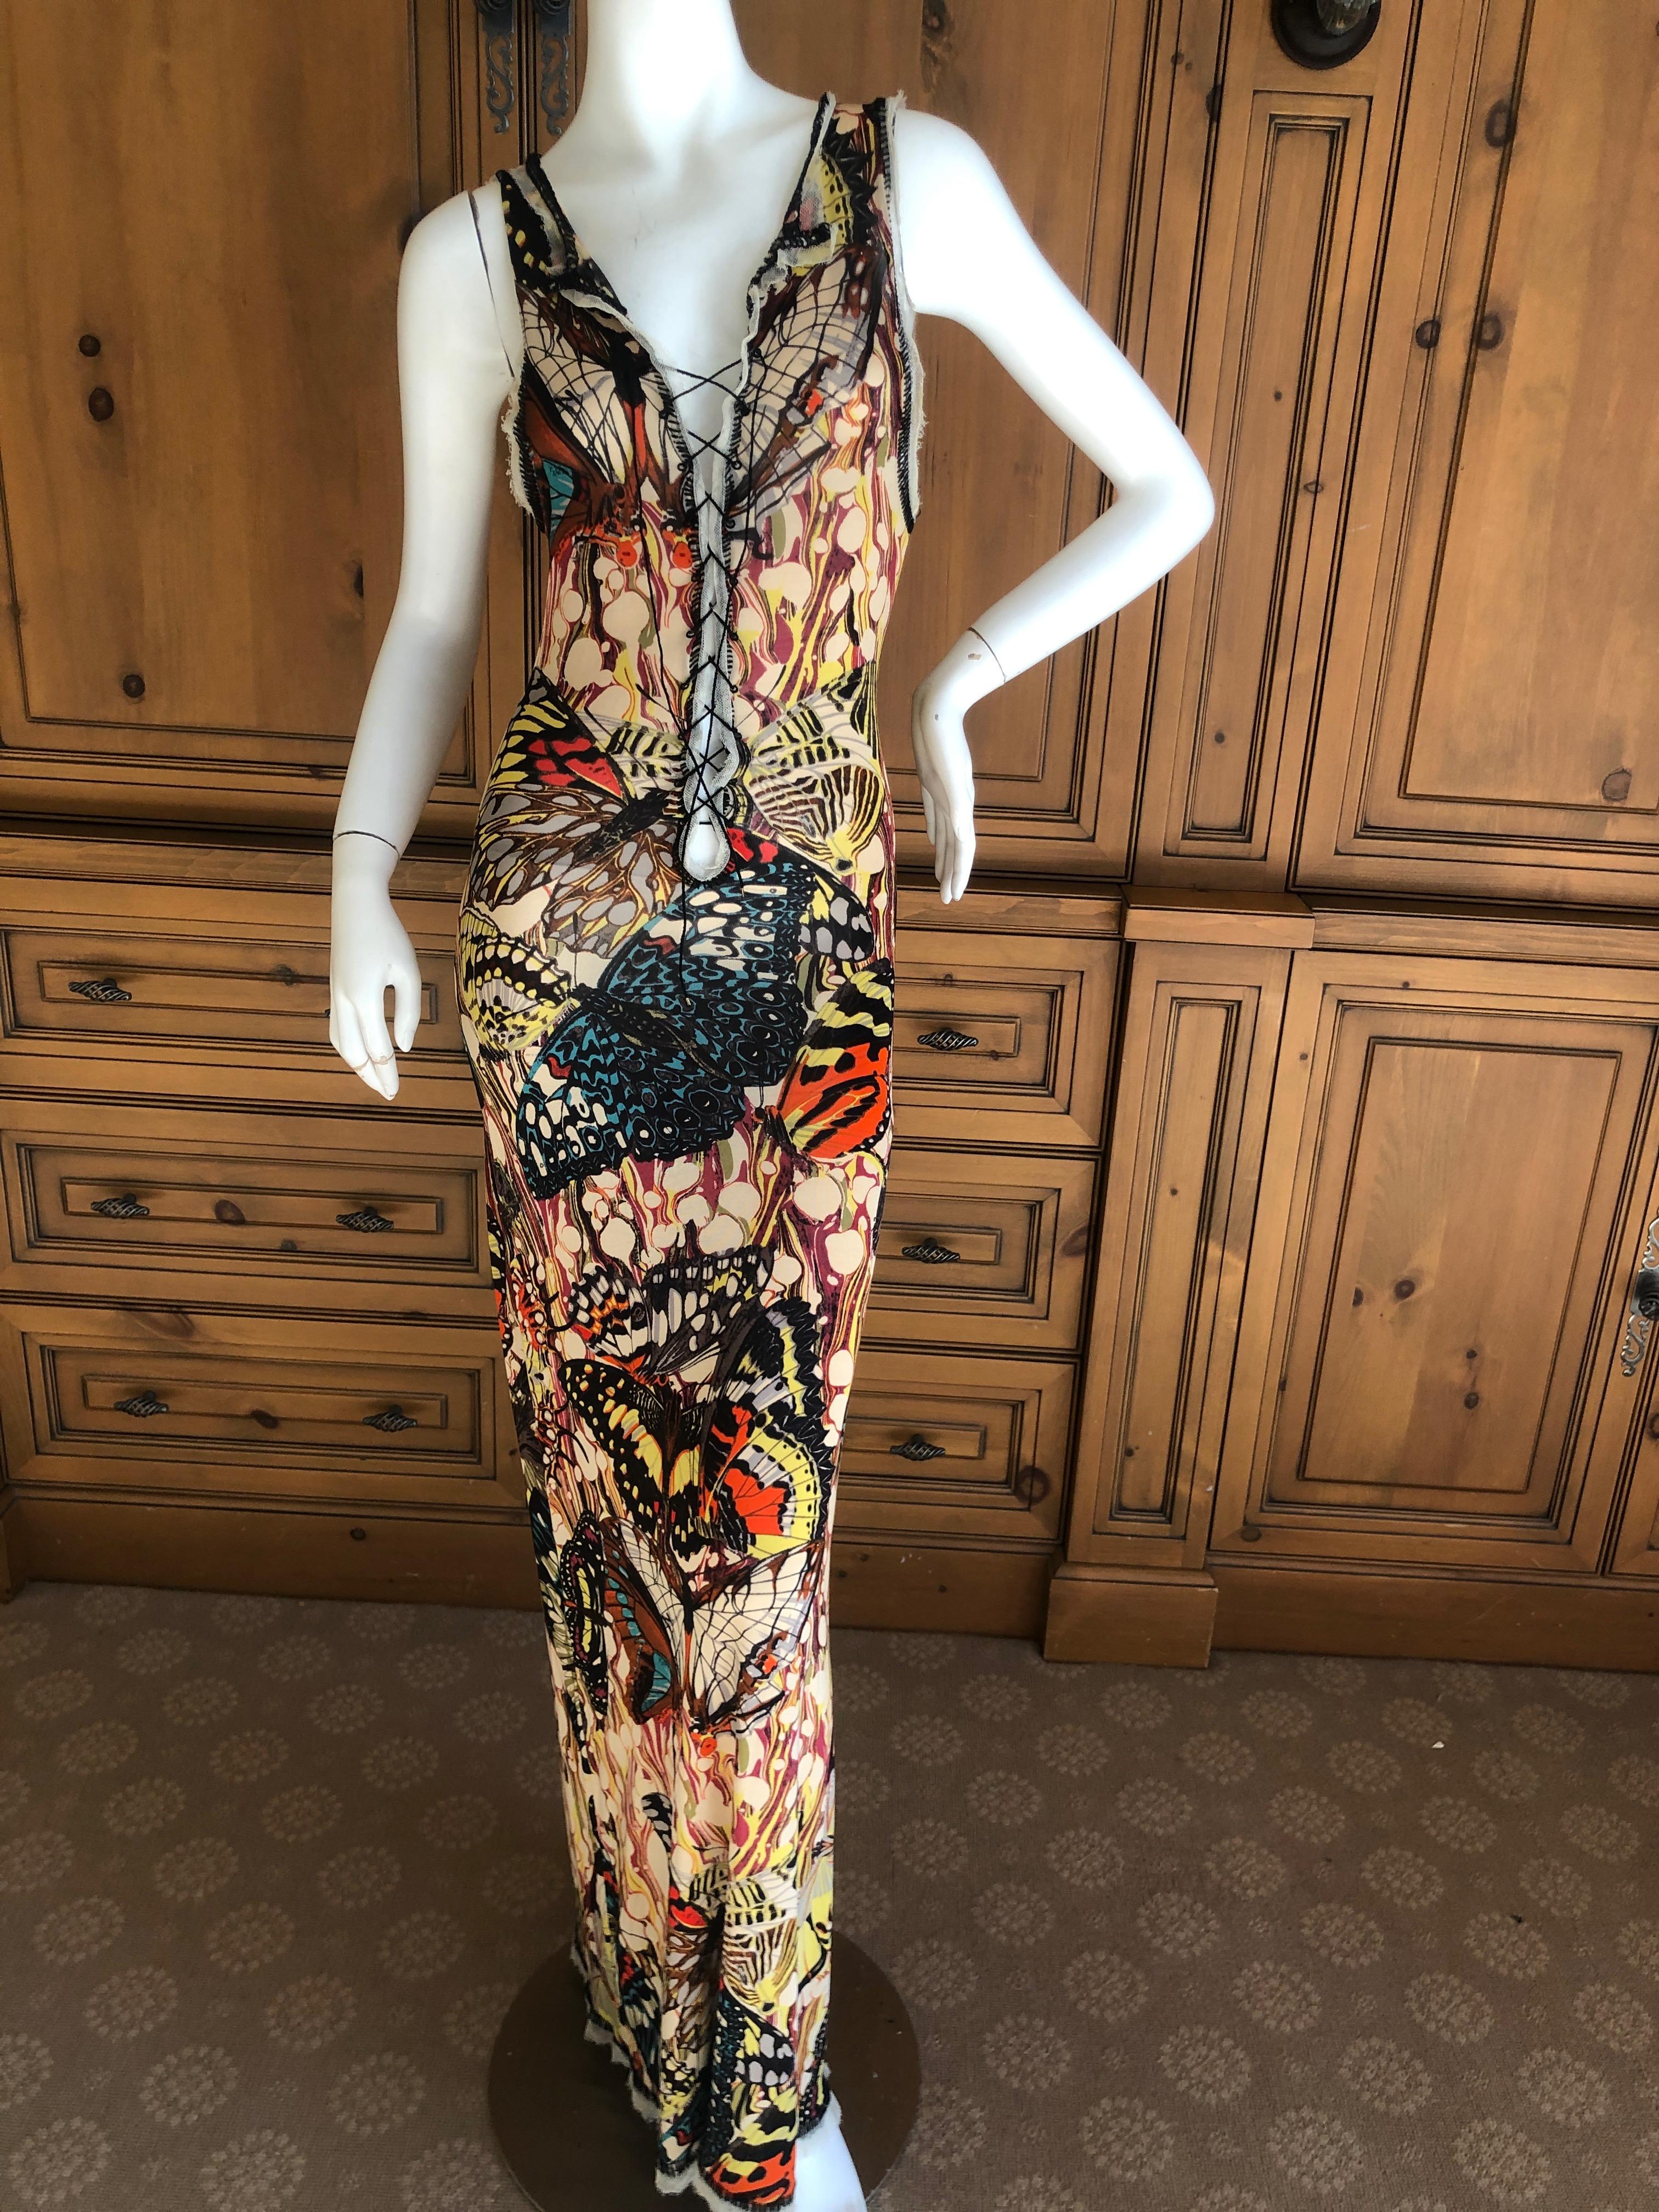 Jean Paul Gaultier Maille Feme Low Cut Butterfly Print Dress w Lace Up Details L In Excellent Condition For Sale In Cloverdale, CA